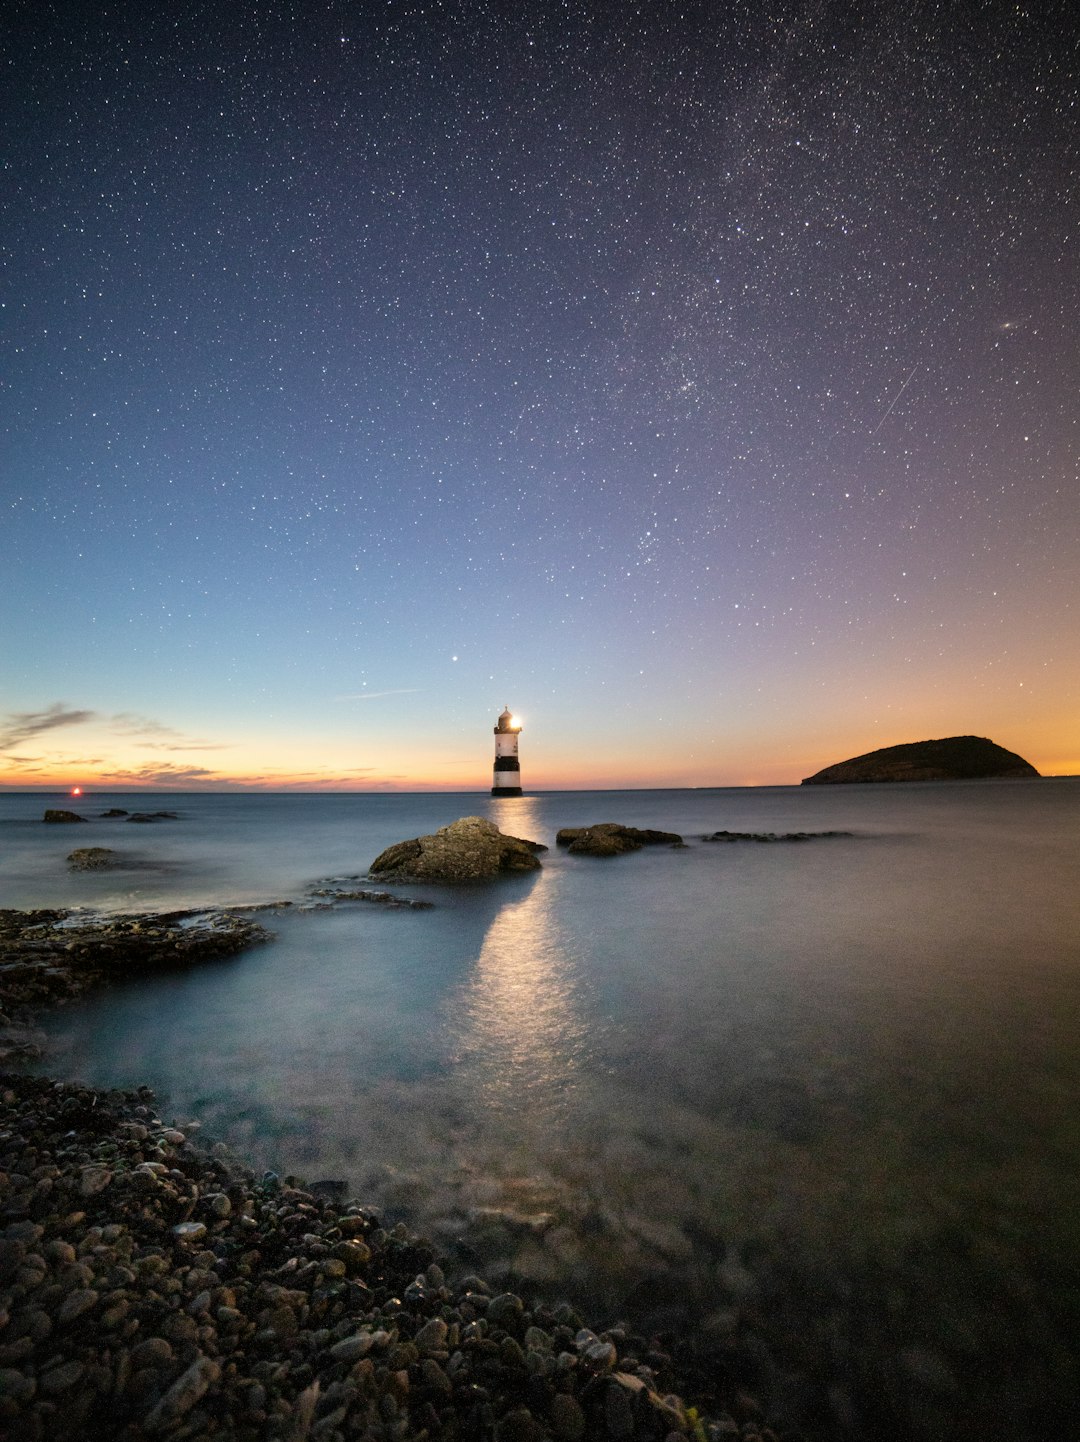 travelers stories about Lighthouse in Penmon Lighthouse (Trwyn Du Lighthouse), United Kingdom